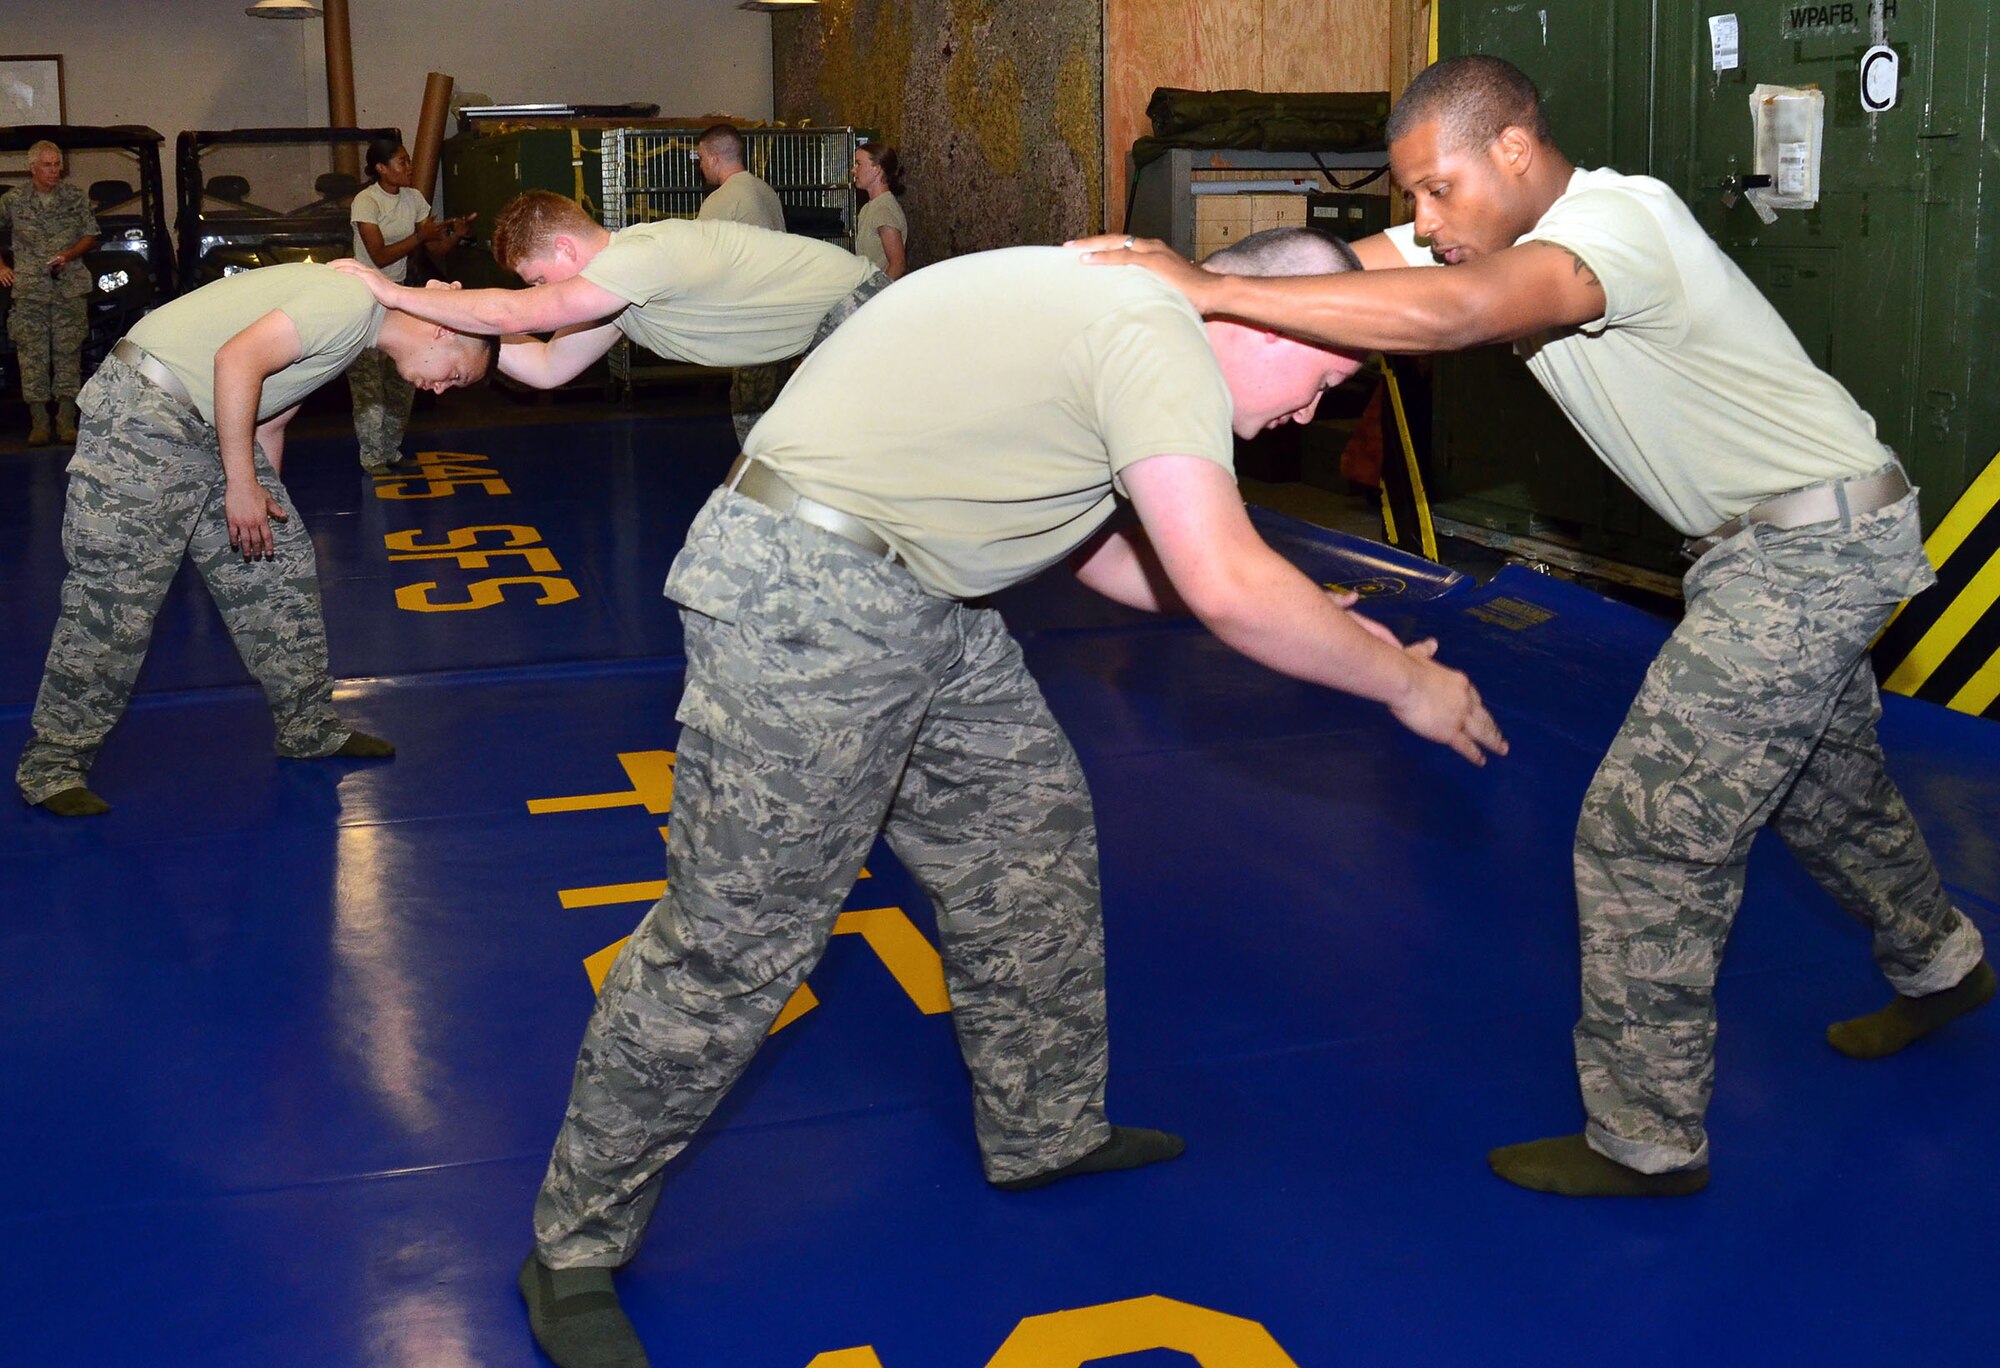 WRIGHT-PATTERSON AIR FORCE BASE, Ohio - Staff Sgt. Michael O’Callaghan, 445th Security Forces Squadron journeyman, teaches new combative techniques while using Senior Airman Shayne Denihan, 445 SFS helper, as a model during the July 13 unit training assembly. All security forces members are required to participate in the training. This training is specifically for SFS and is different from Army and Air Force combative training. (U.S. Air Force photo/Staff Sgt. Amanda Duncan)